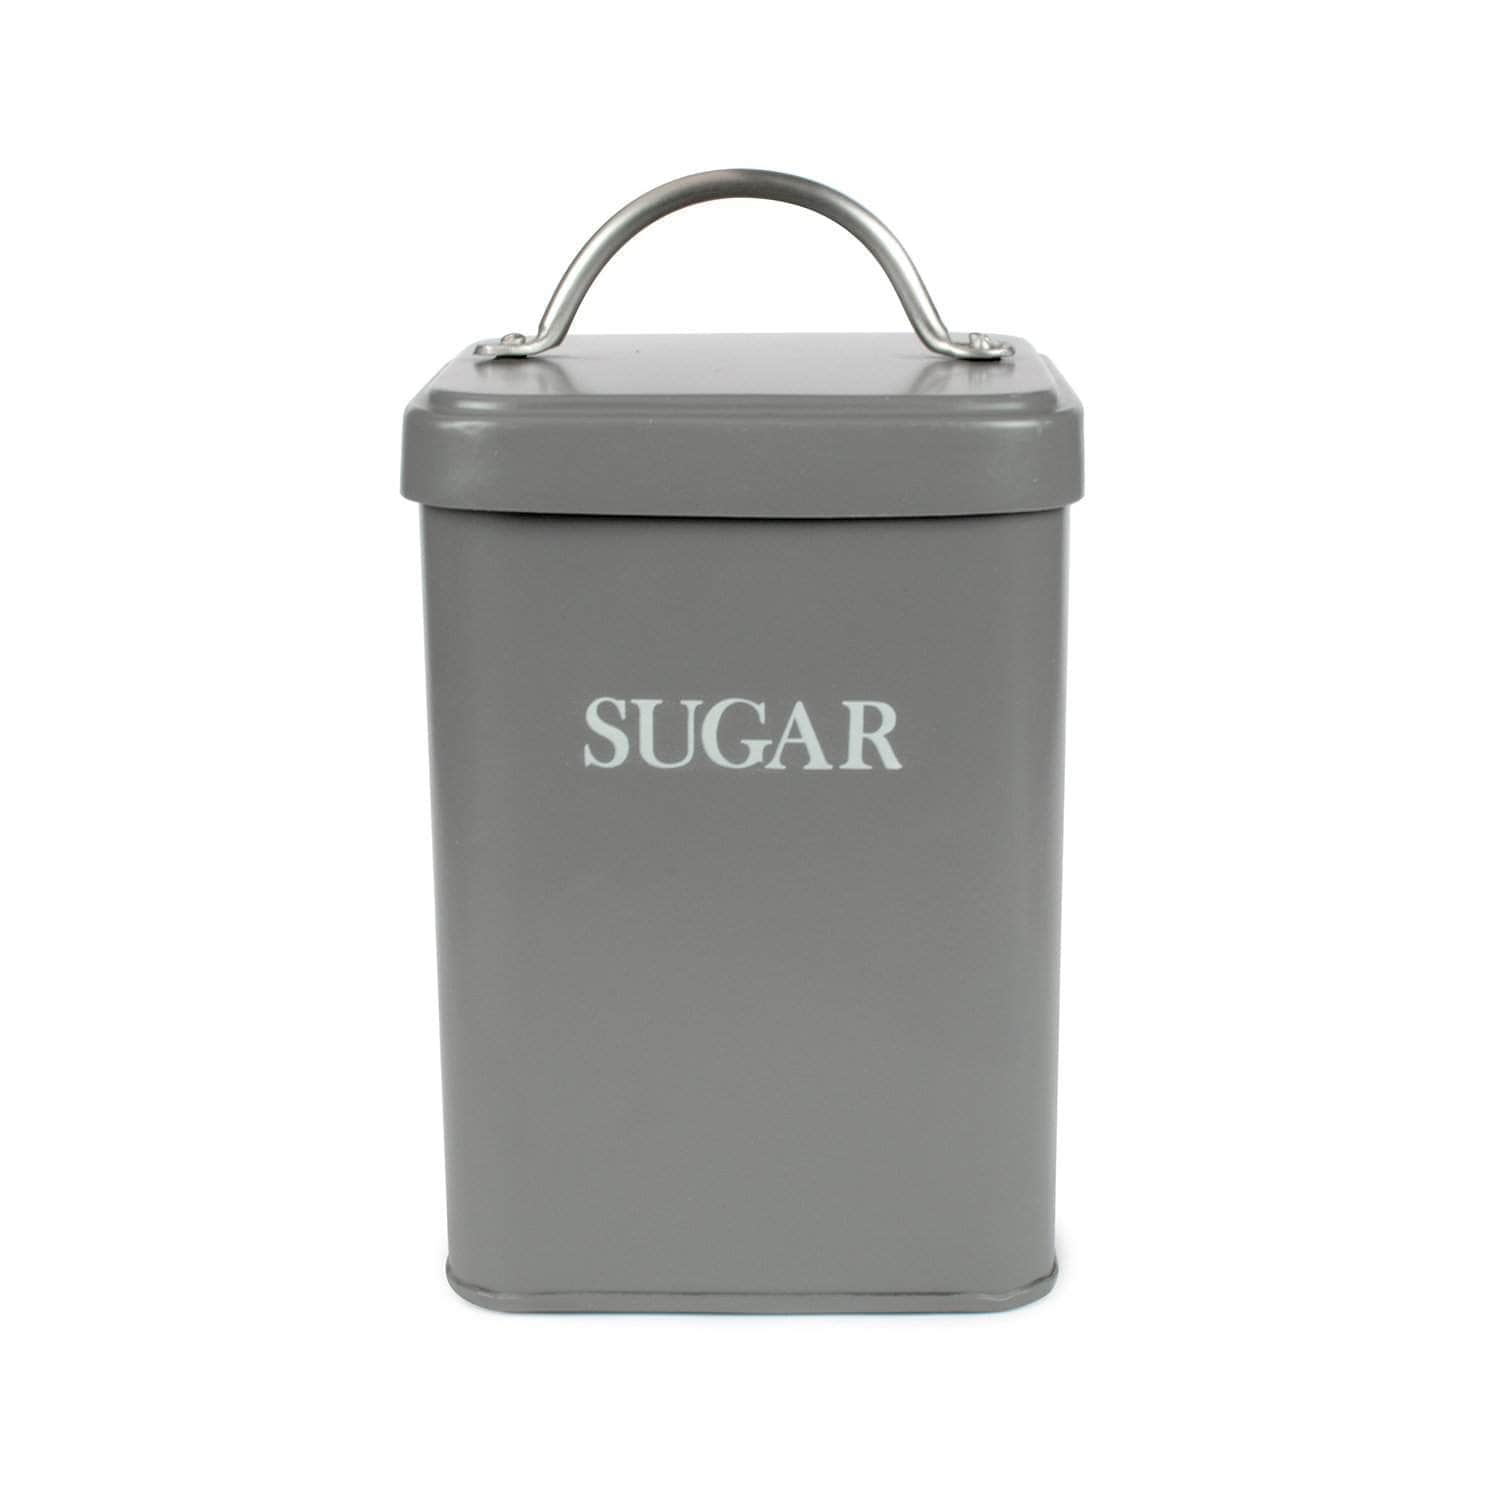 *Not Quite Perfect* Sugar canister in charcoal